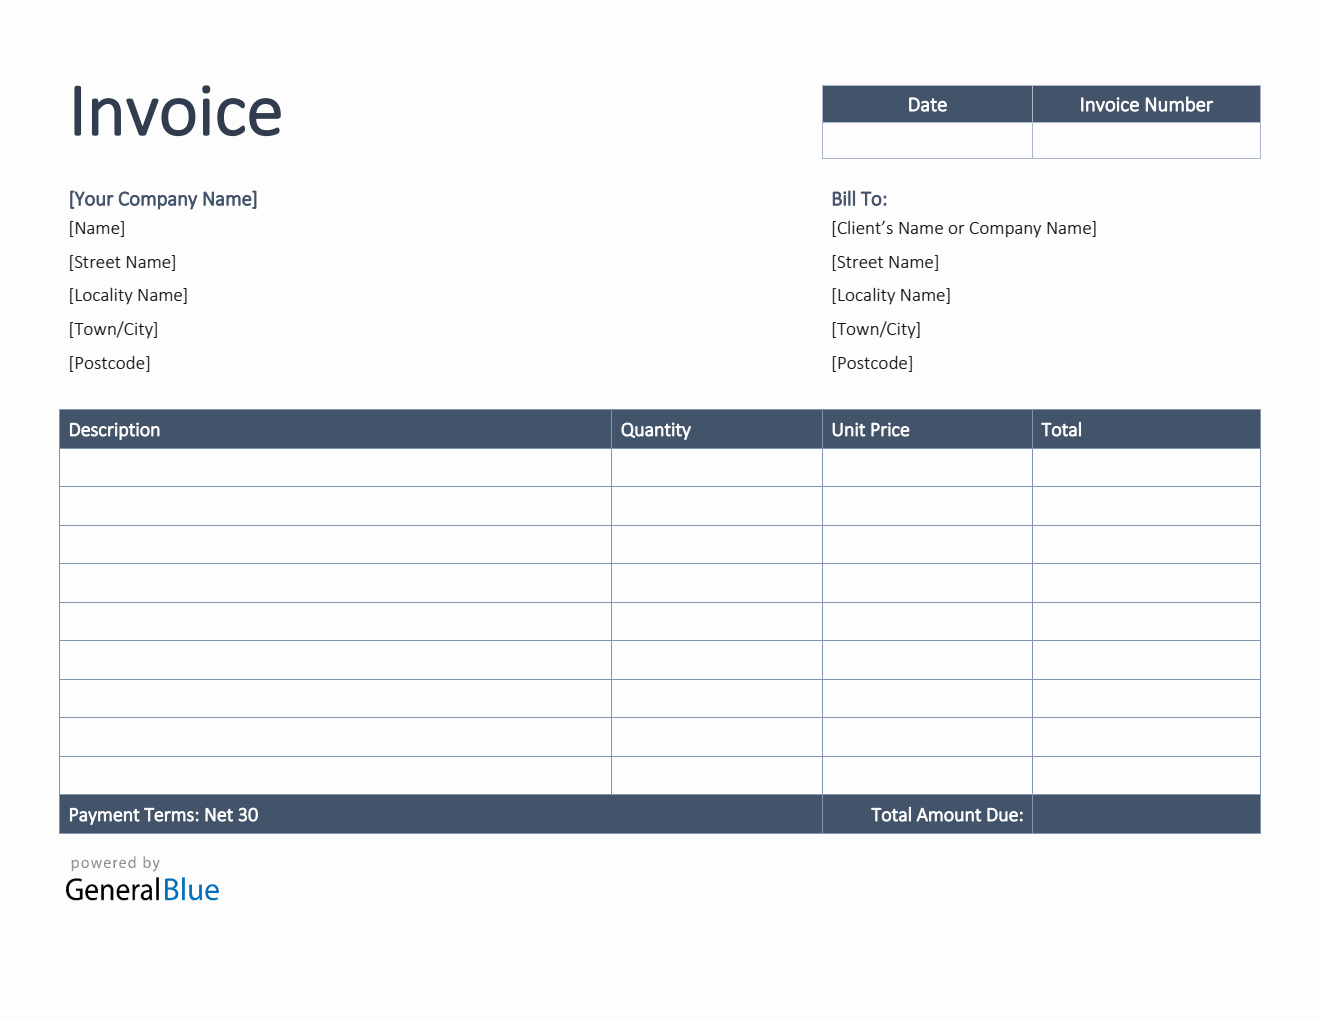 Invoice Template for U.K. in Word (Bordered)